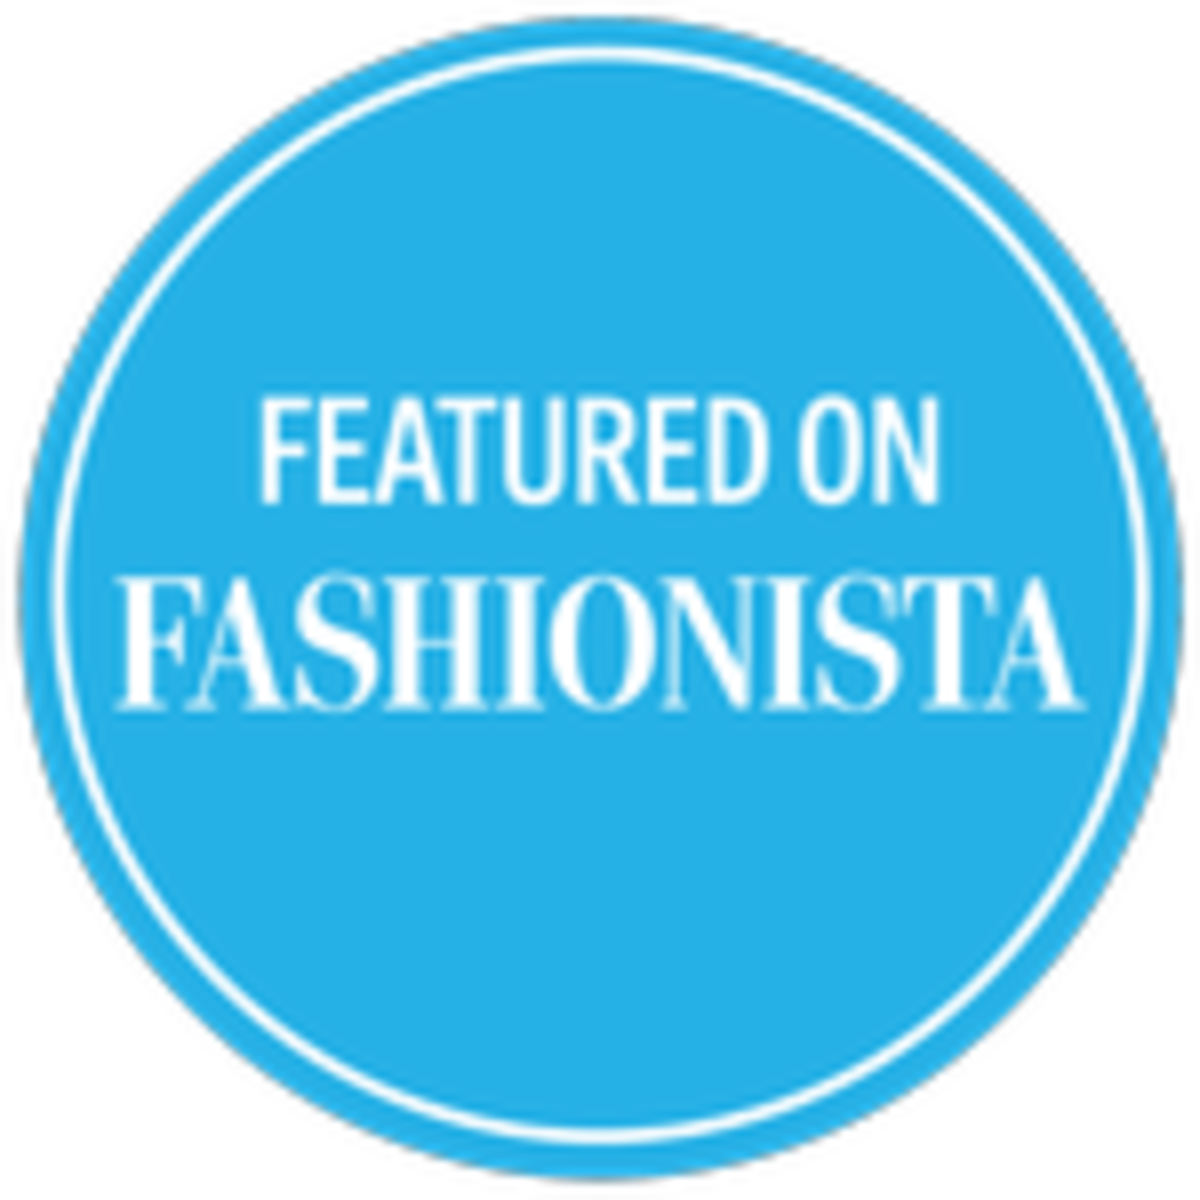 featured-on-fashionista-licensing-seal-150